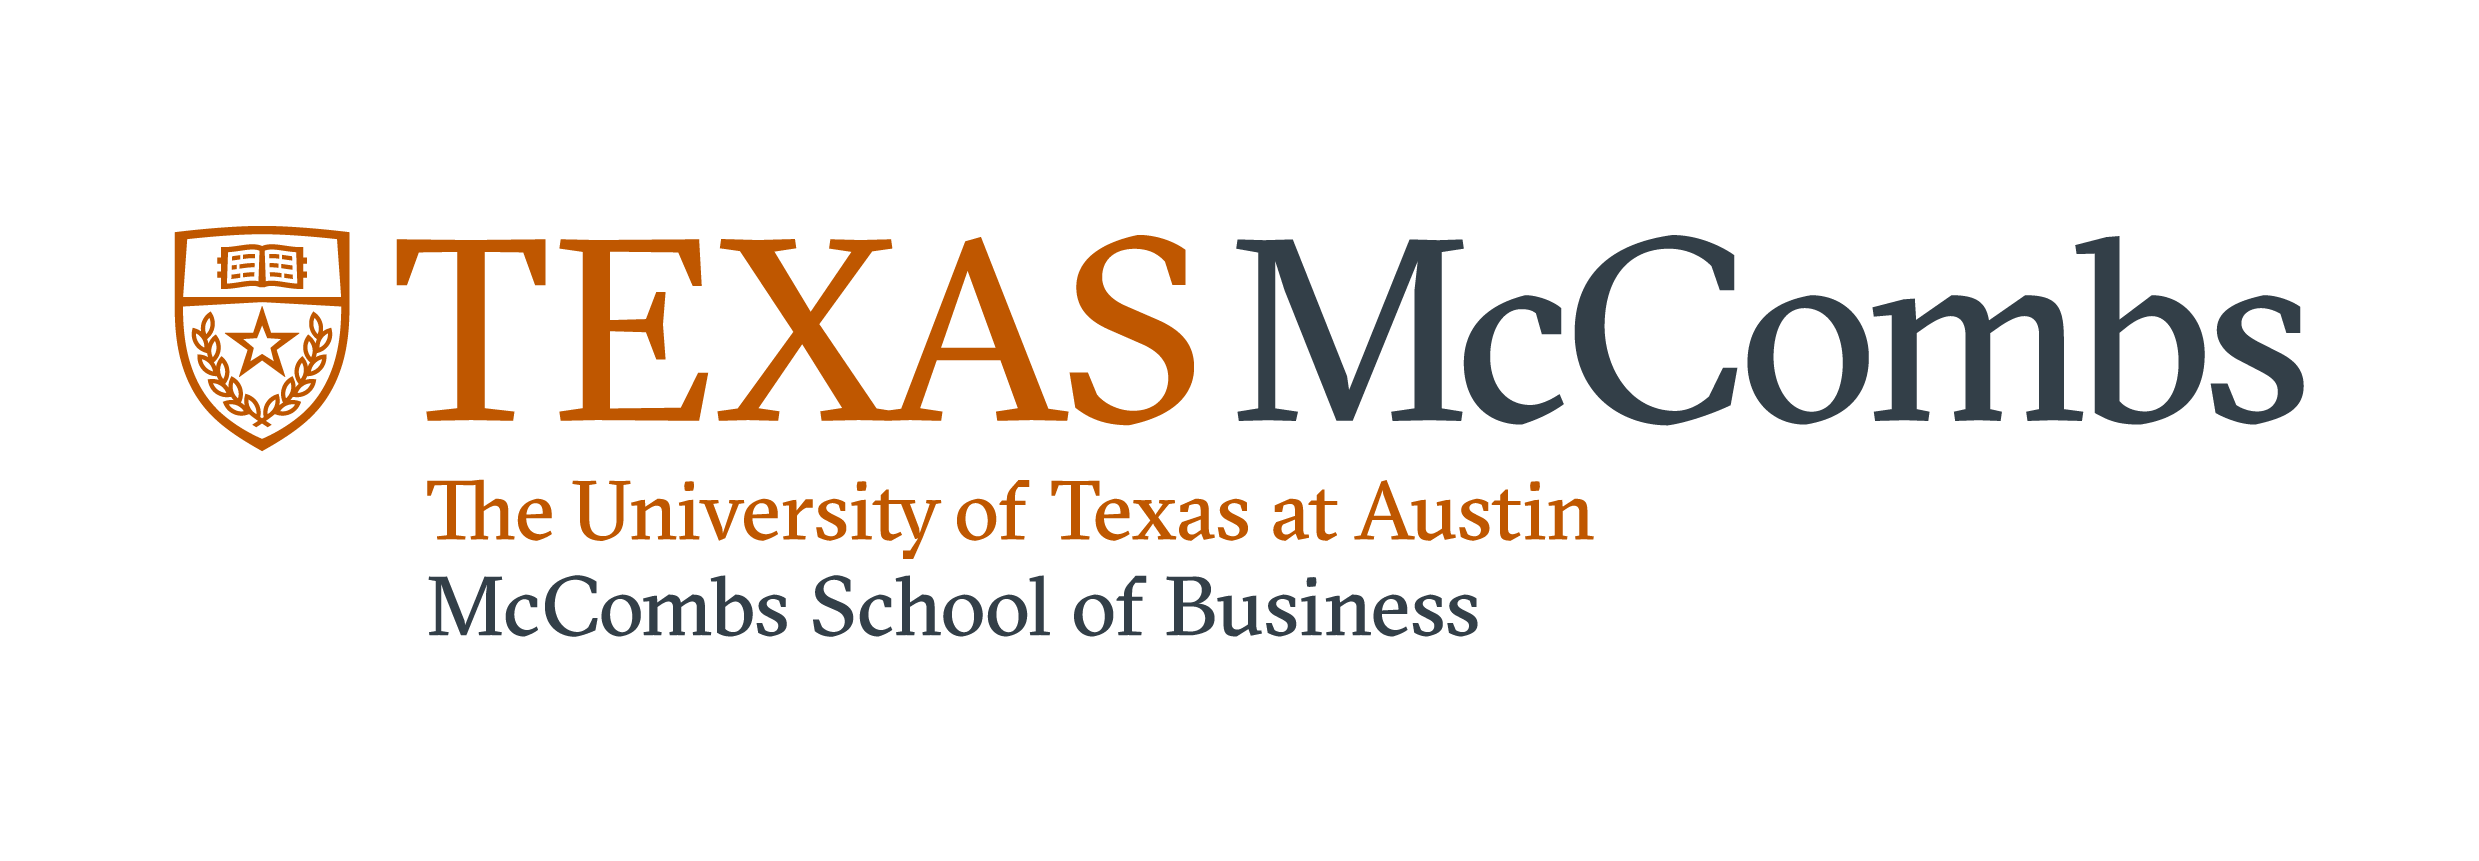 the university of texas at austin mccombs school of business